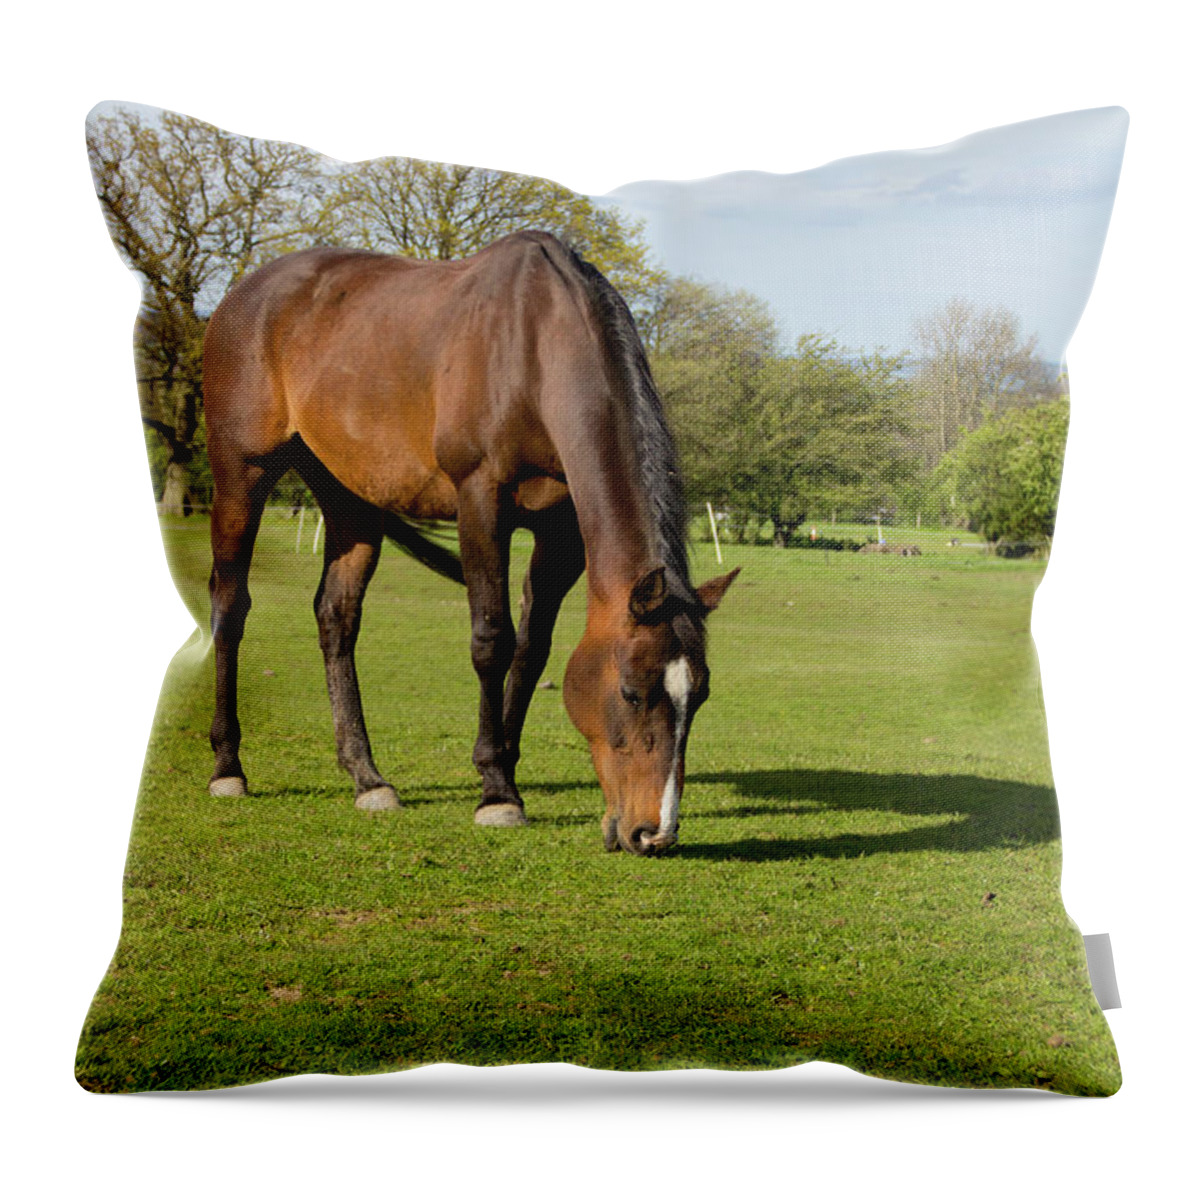 Horse Throw Pillow featuring the photograph Bay Horse Grazing by Groomee